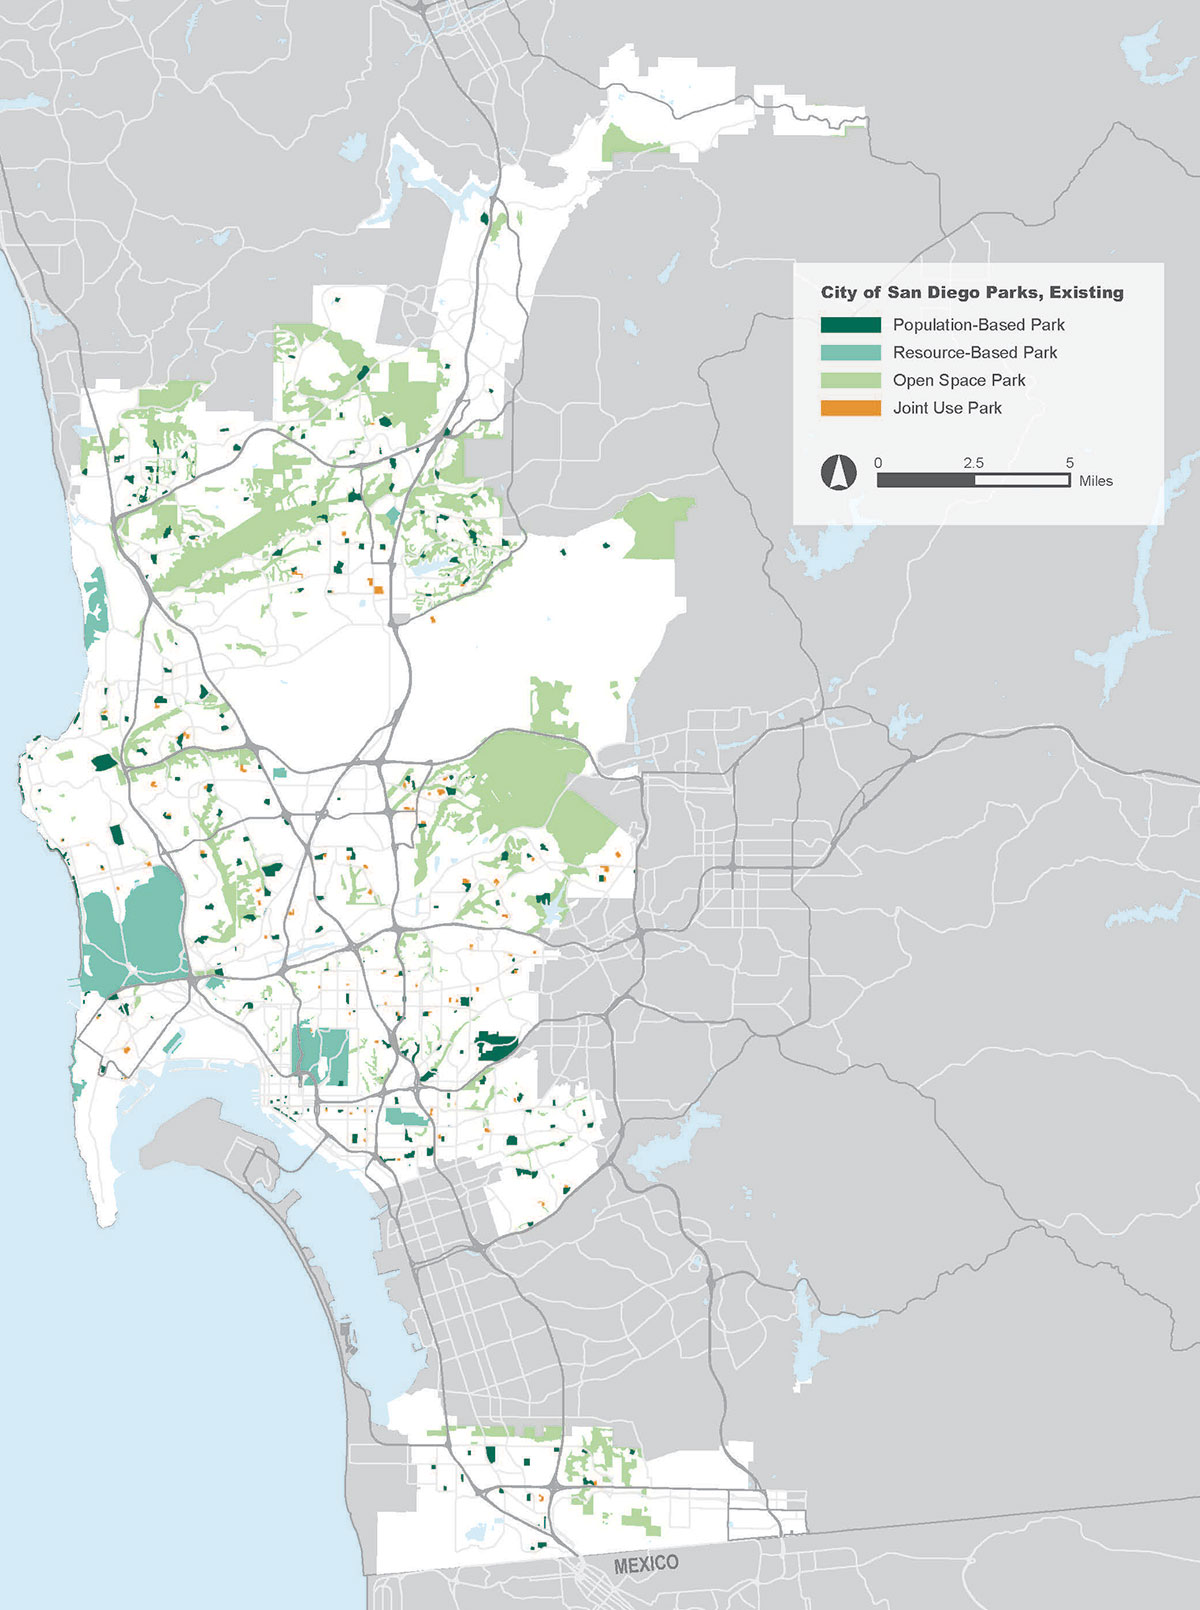 Map of existing parks in the City of San Diego